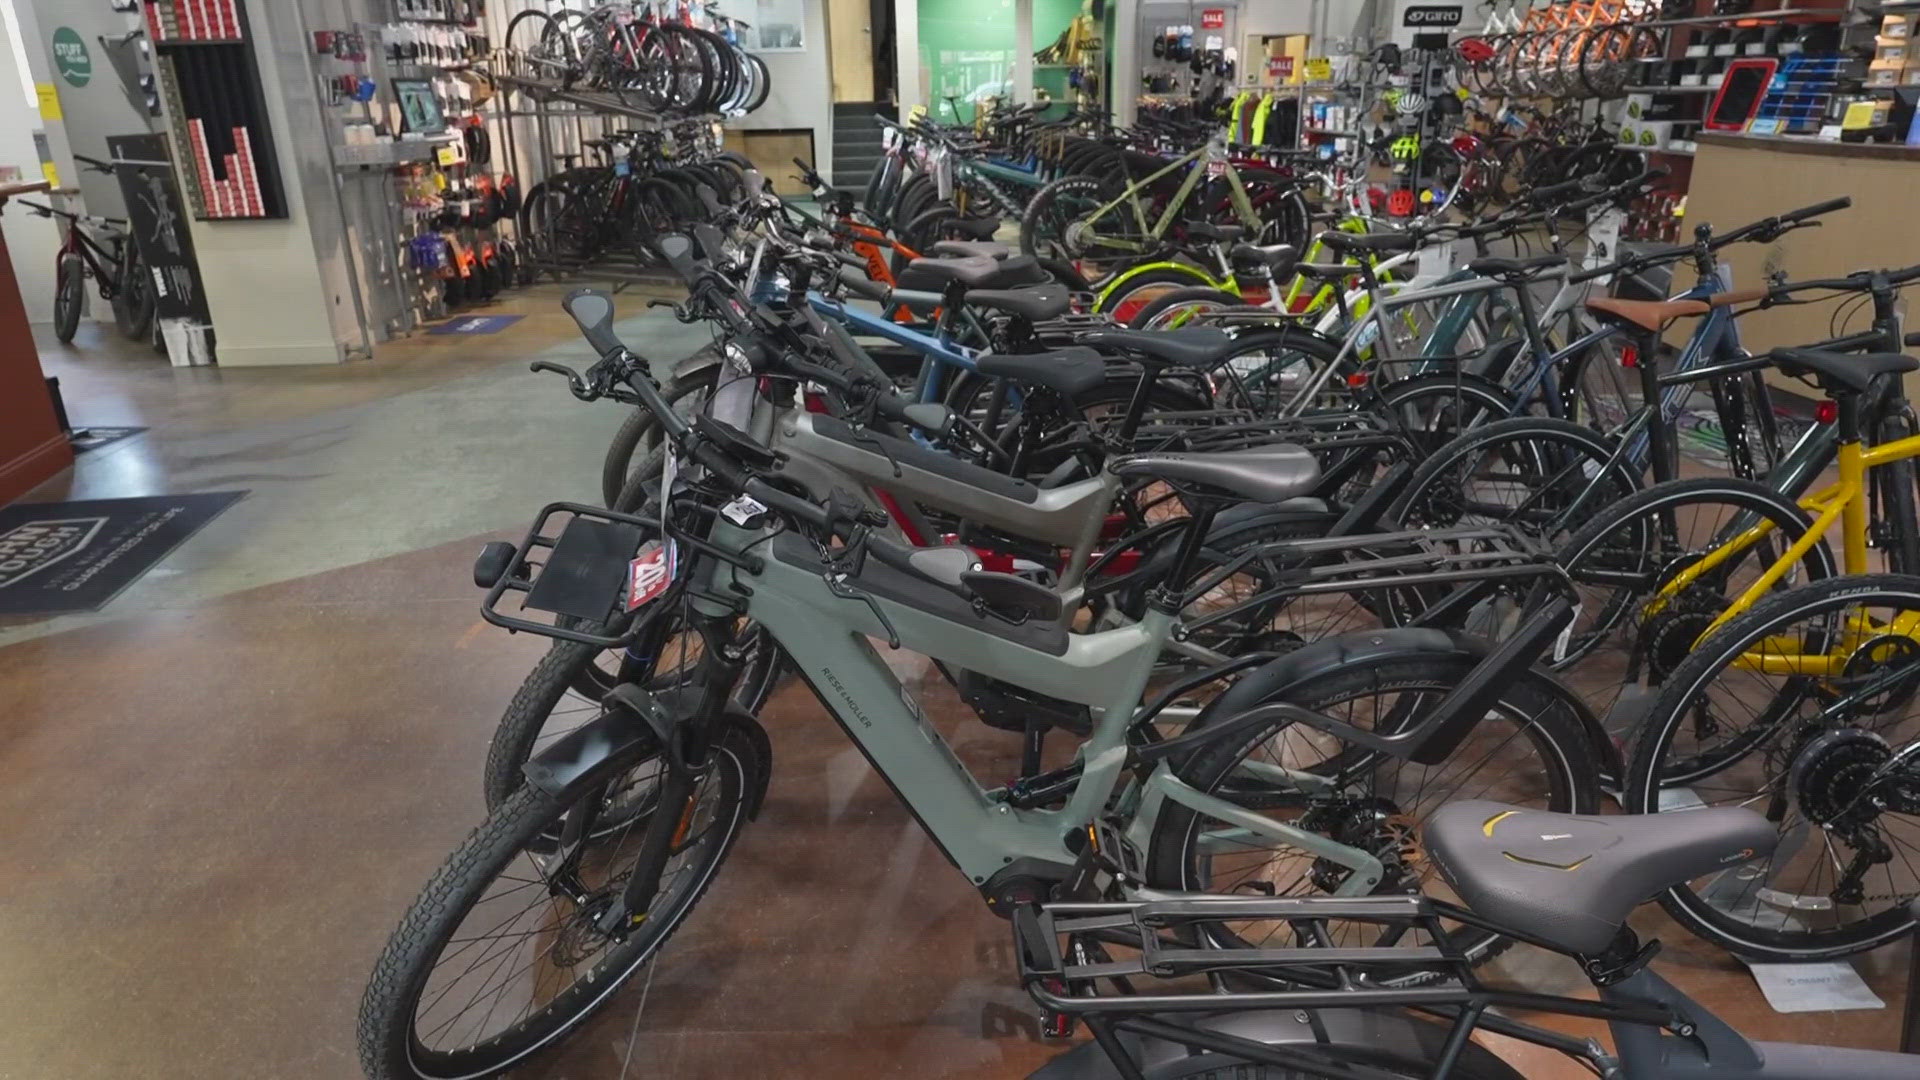 Two Portland shops expected to sell hundreds of used bikes to crowds of customers at annual swaps.